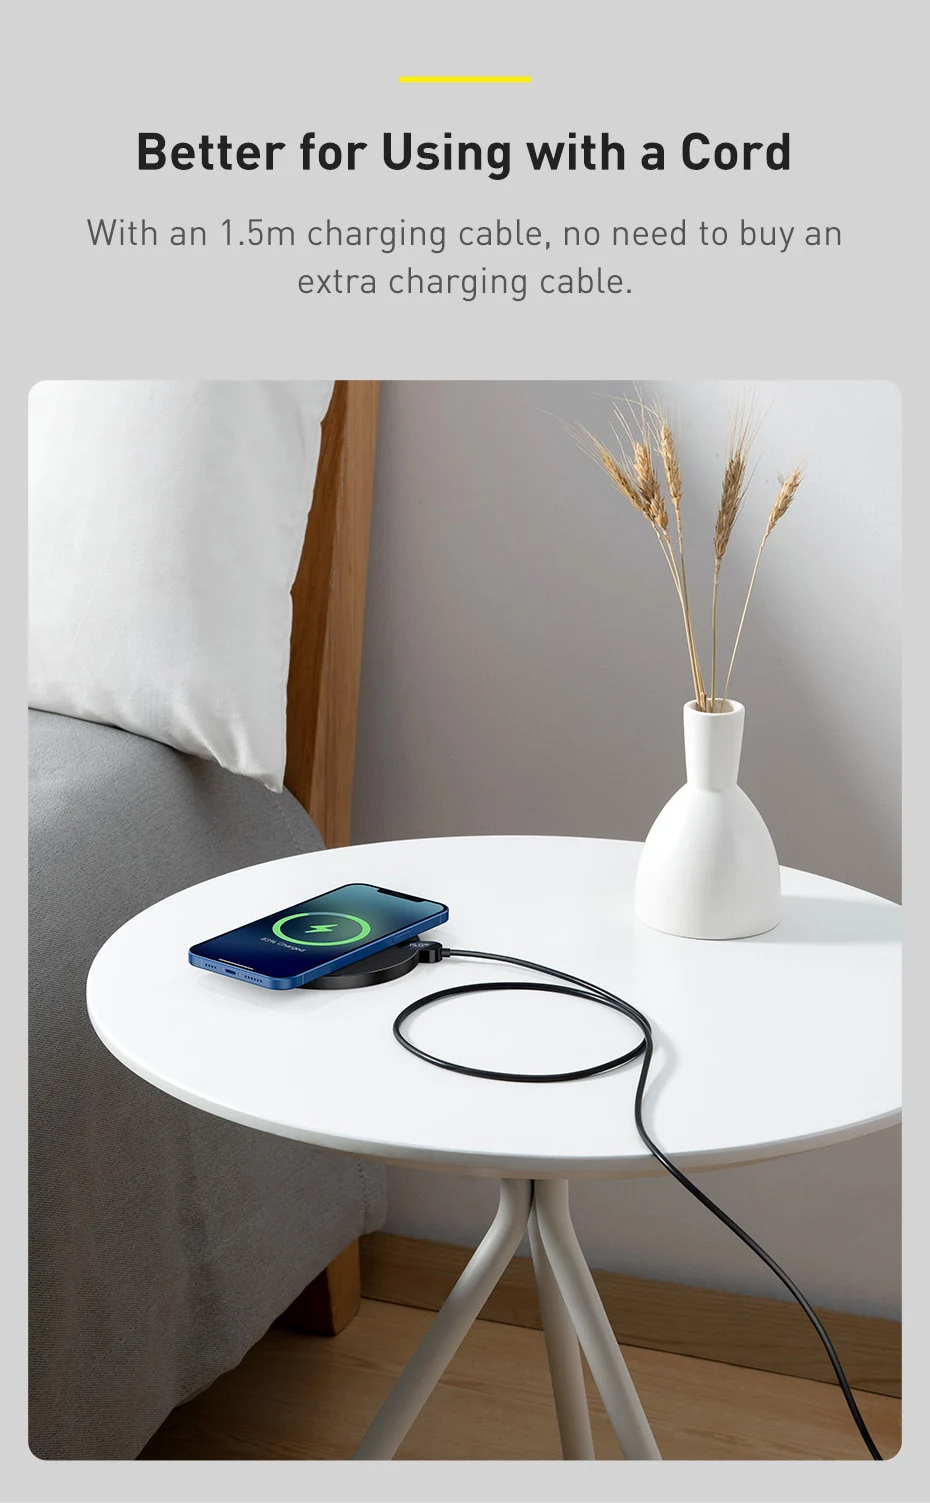 With an 1.5m charging cable, no need to buy an extra charging cable.